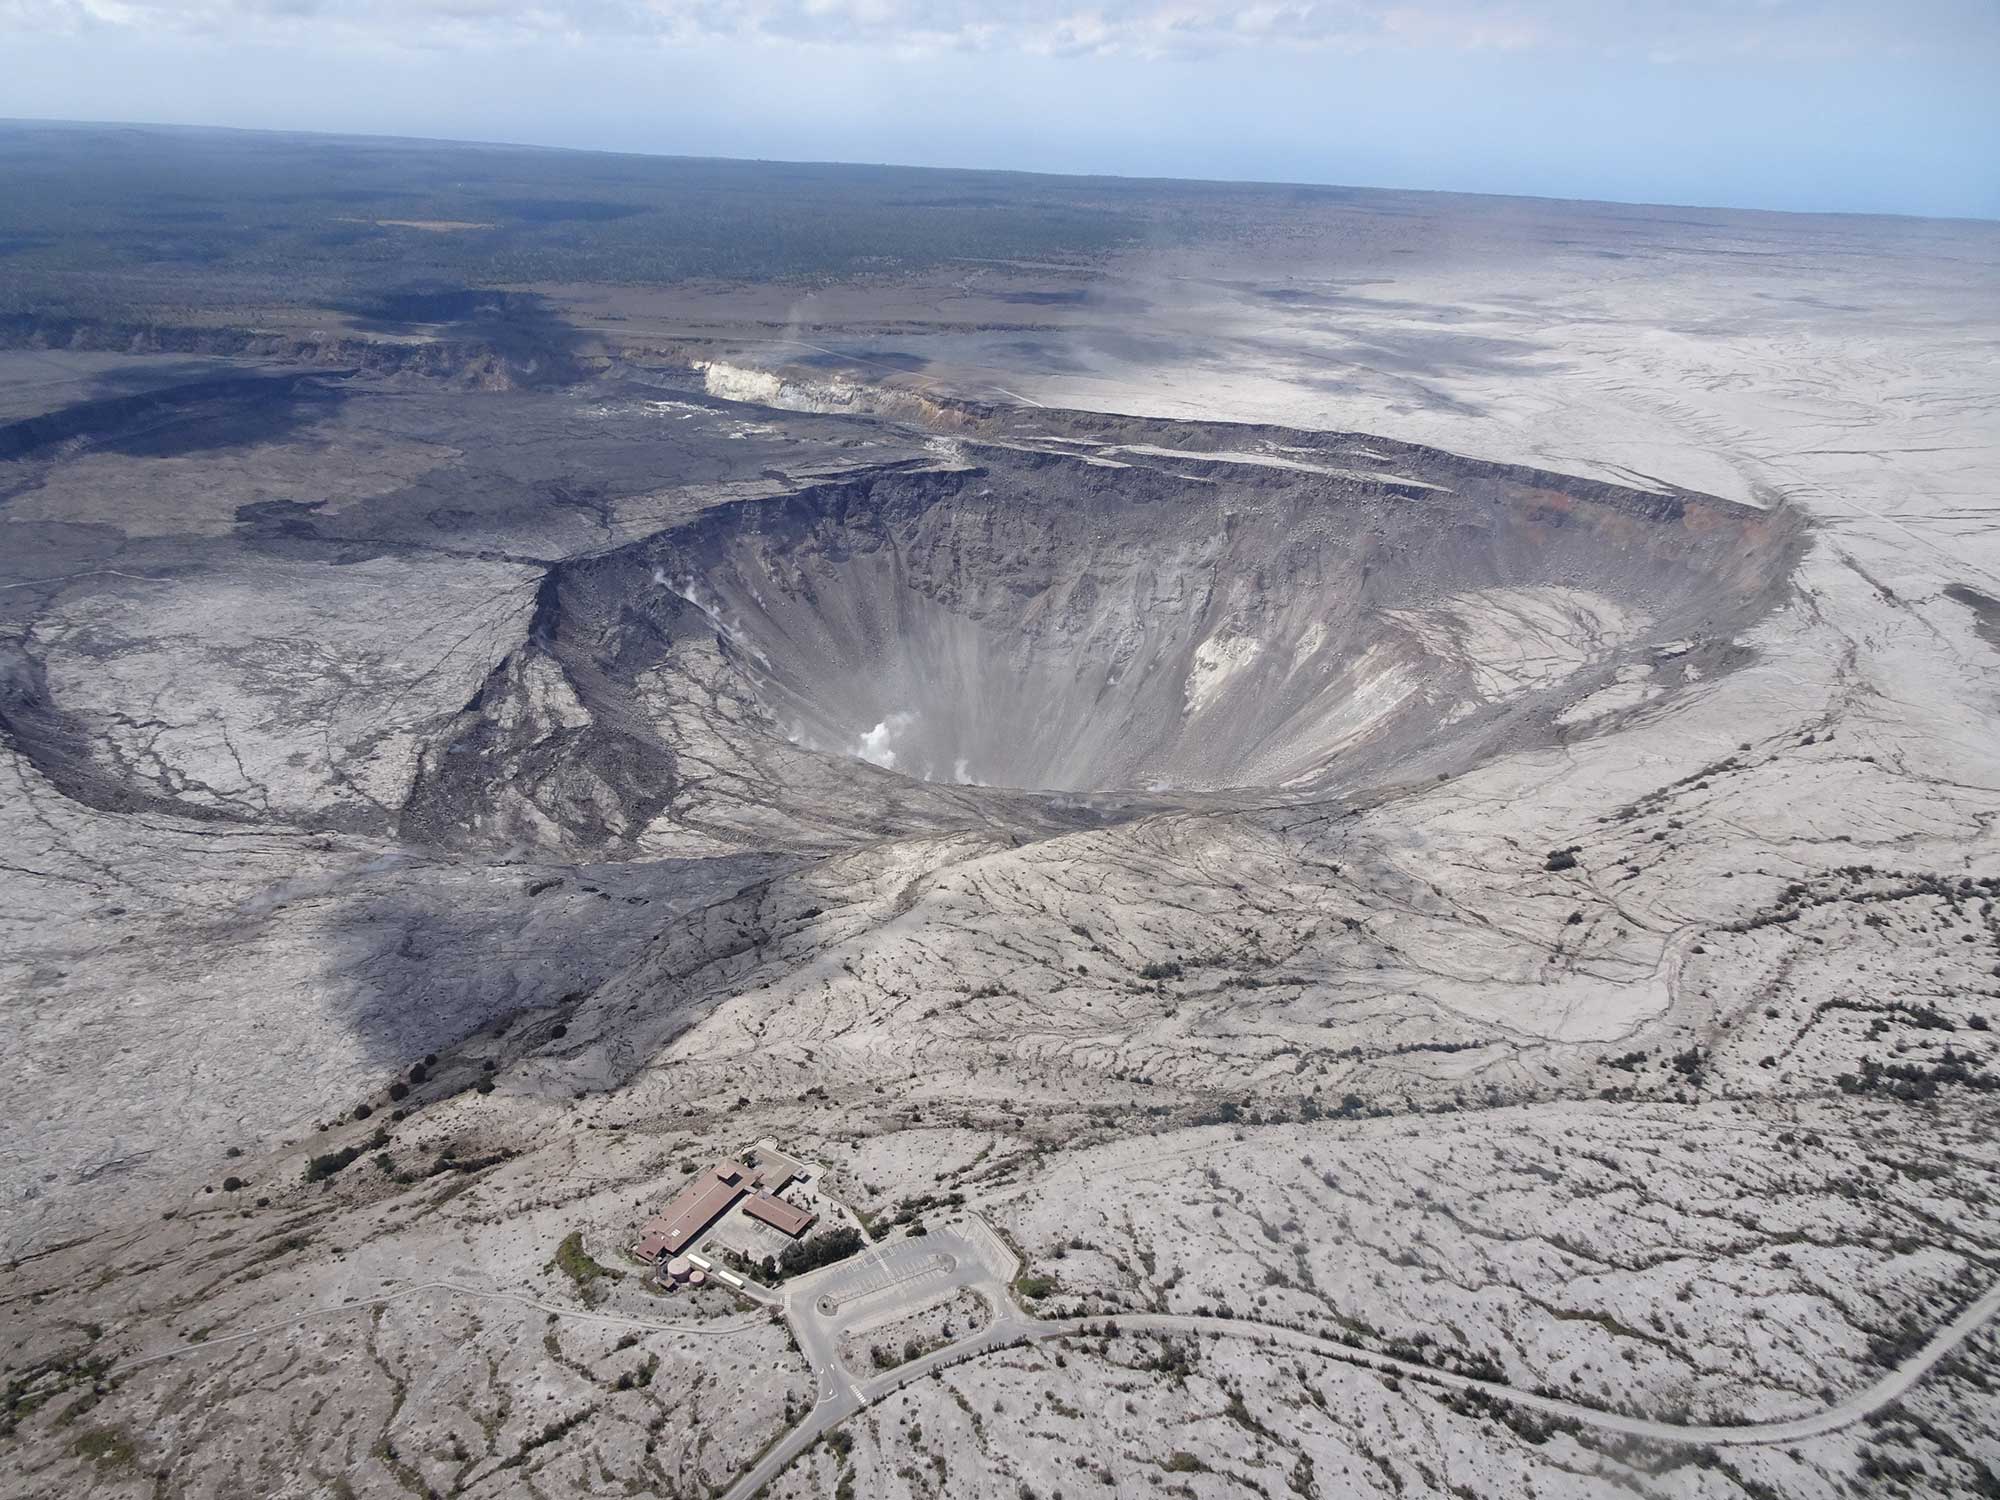 Photograph of the summit of Kilauea in July 2018 showing the caldera zone with Halema'uma'u crater appearing like a deep pit. The landscape around the crater is dry with sparse vegetation, and the Jagger Museum can be seen in the lower part of the image near the edge of the crater. The museum had to be closed in 2018 due to damage from earthquakes.